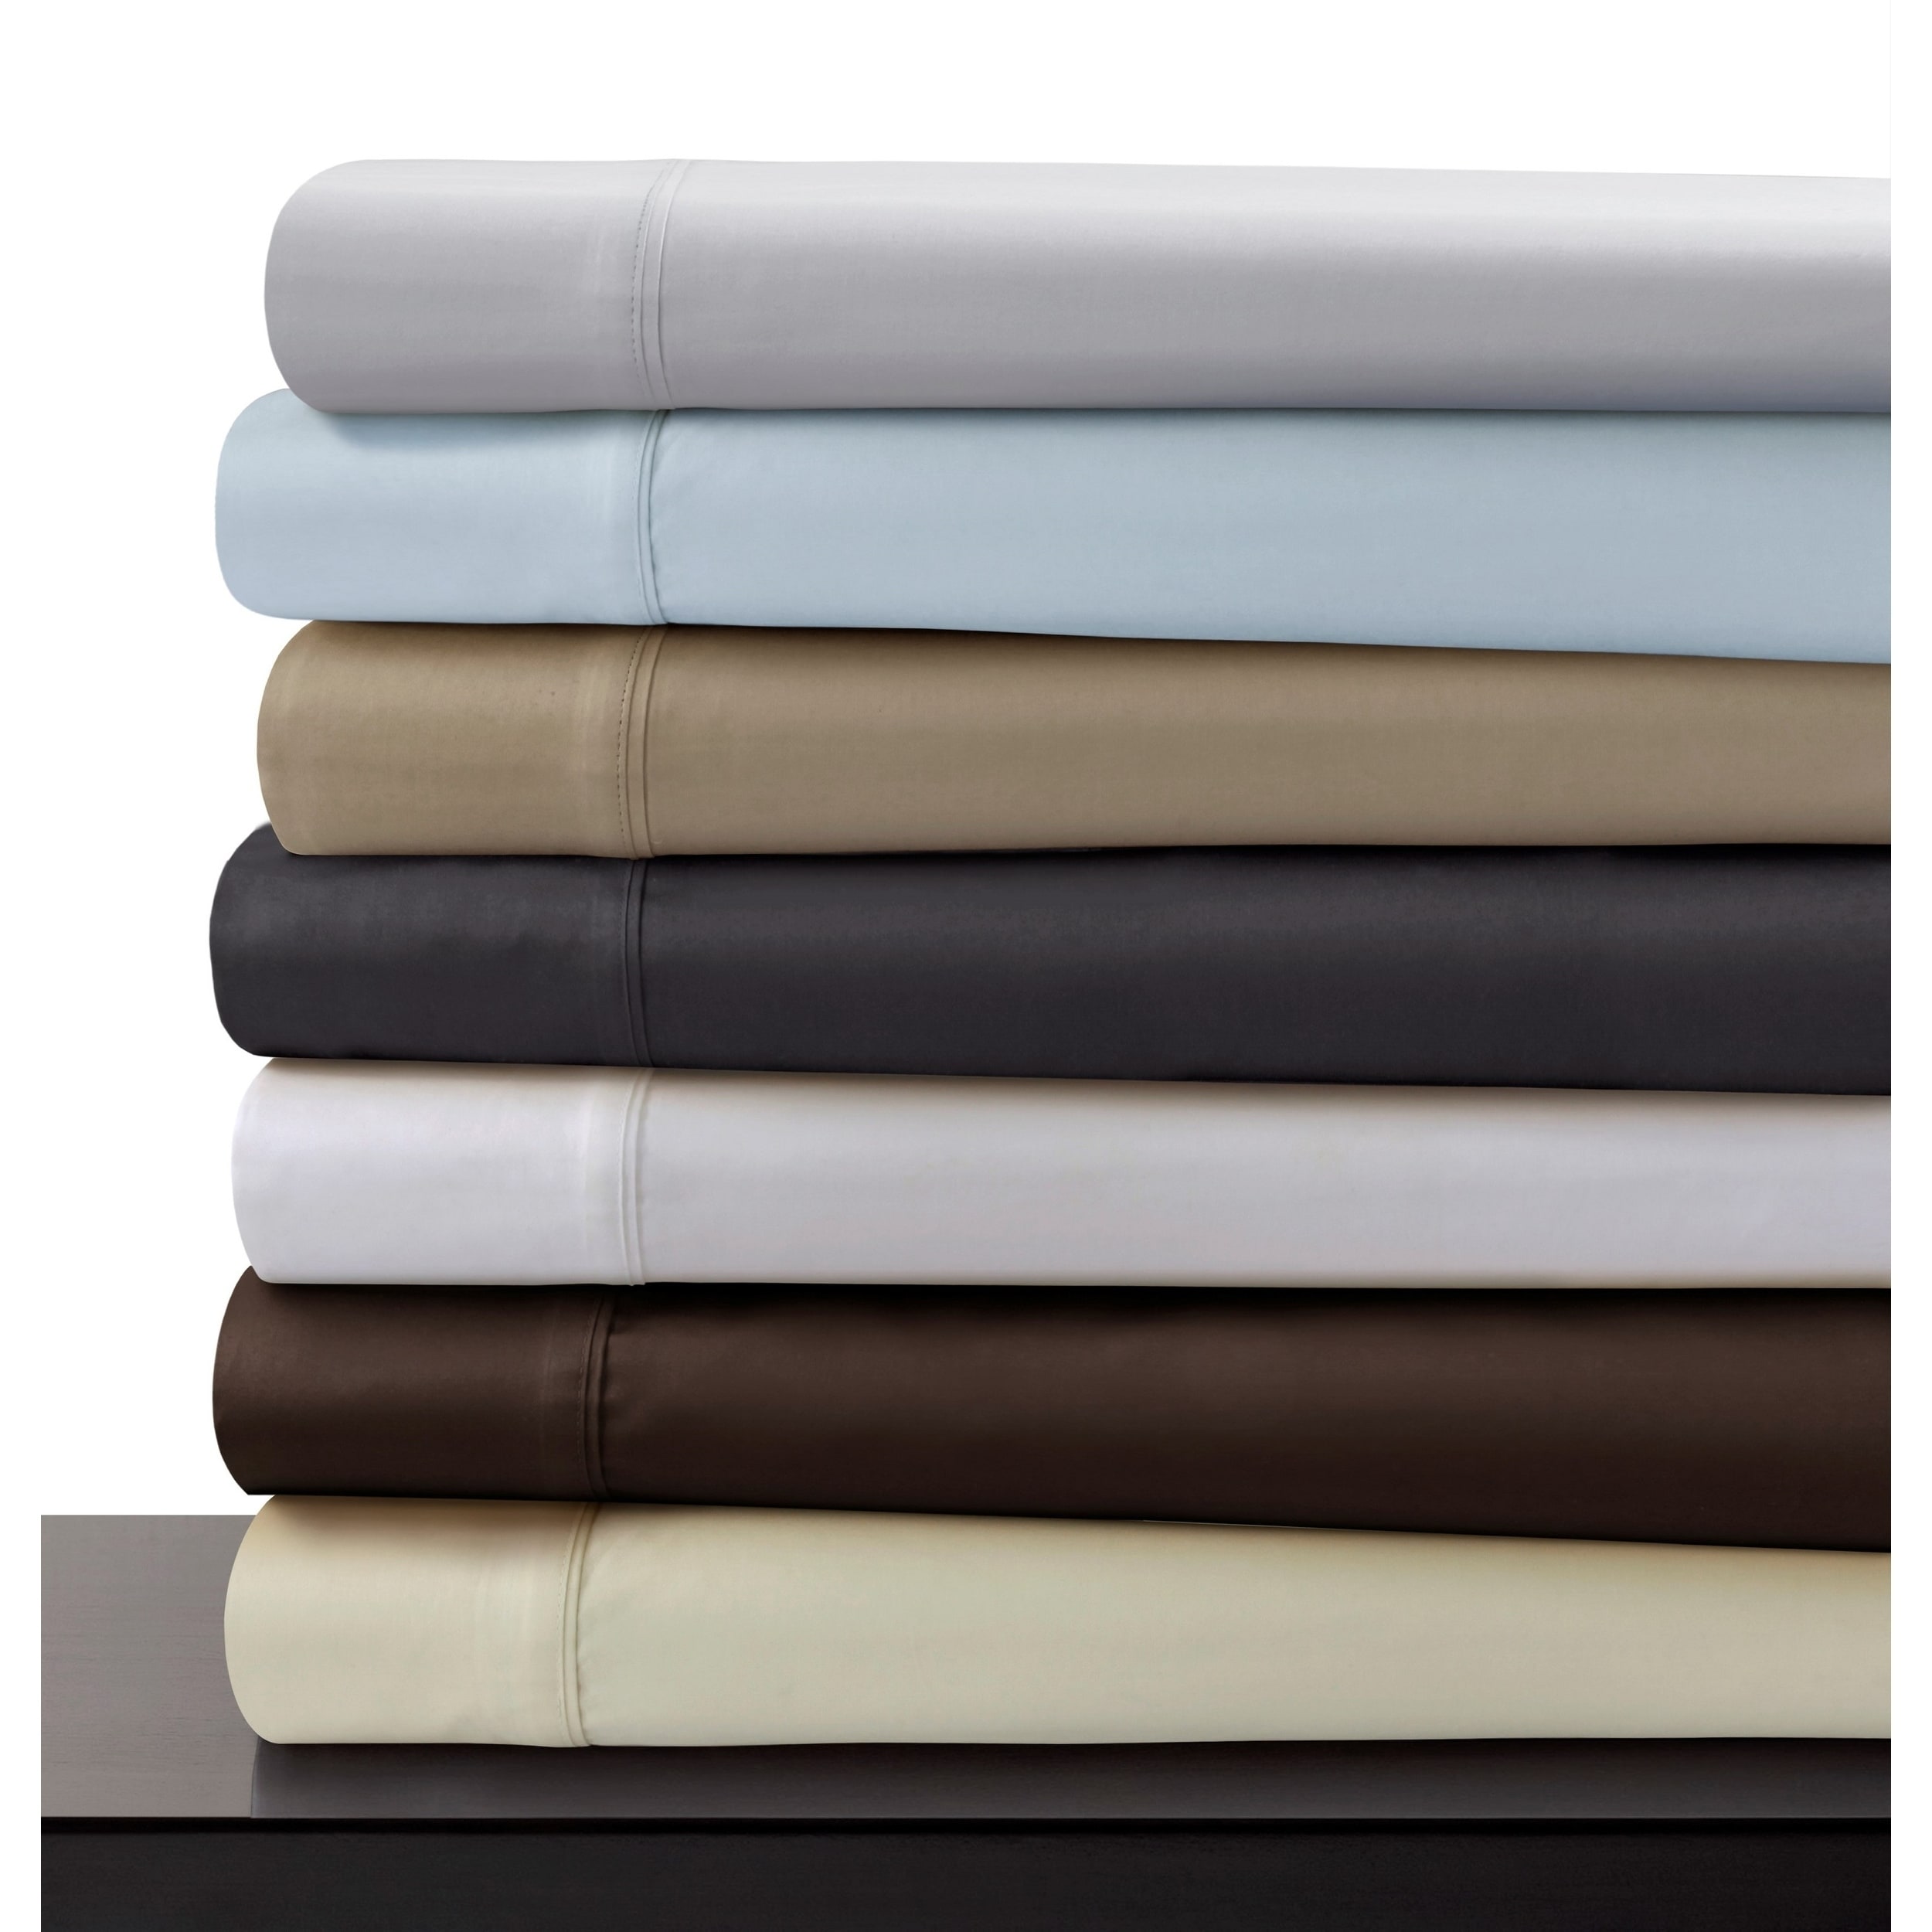 600 Thread Count Egyptian Cotton Sheets 4 PC Sheet Set Fit Upto 15''